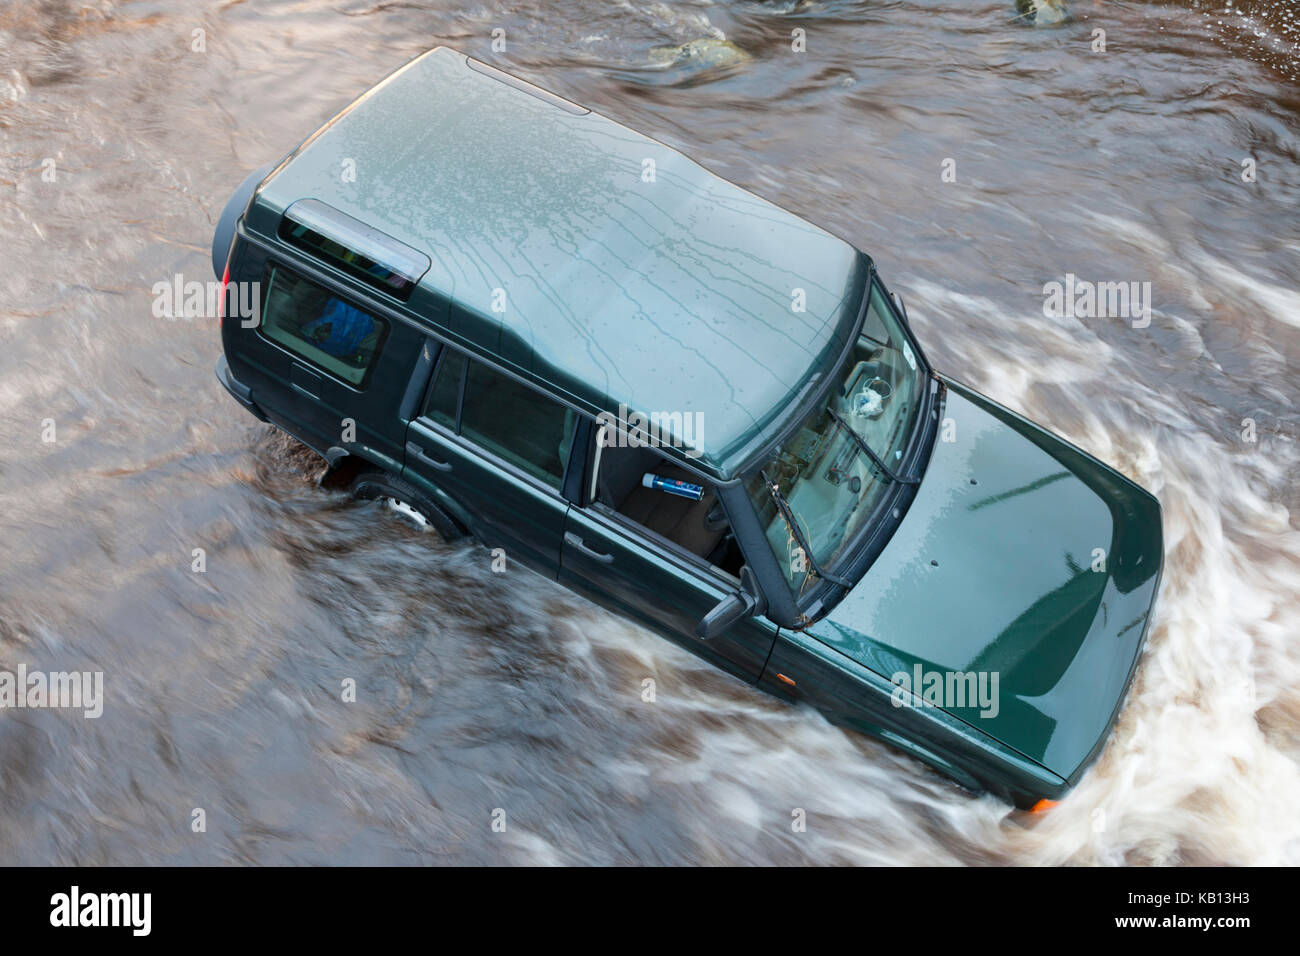 A 4x4 Vehicle Swept Away by Floodwater While Trying to Cross a Ford on the River Wear in Westgate, Weardale, County Durham UK. The Driver Was Rescued  Stock Photo